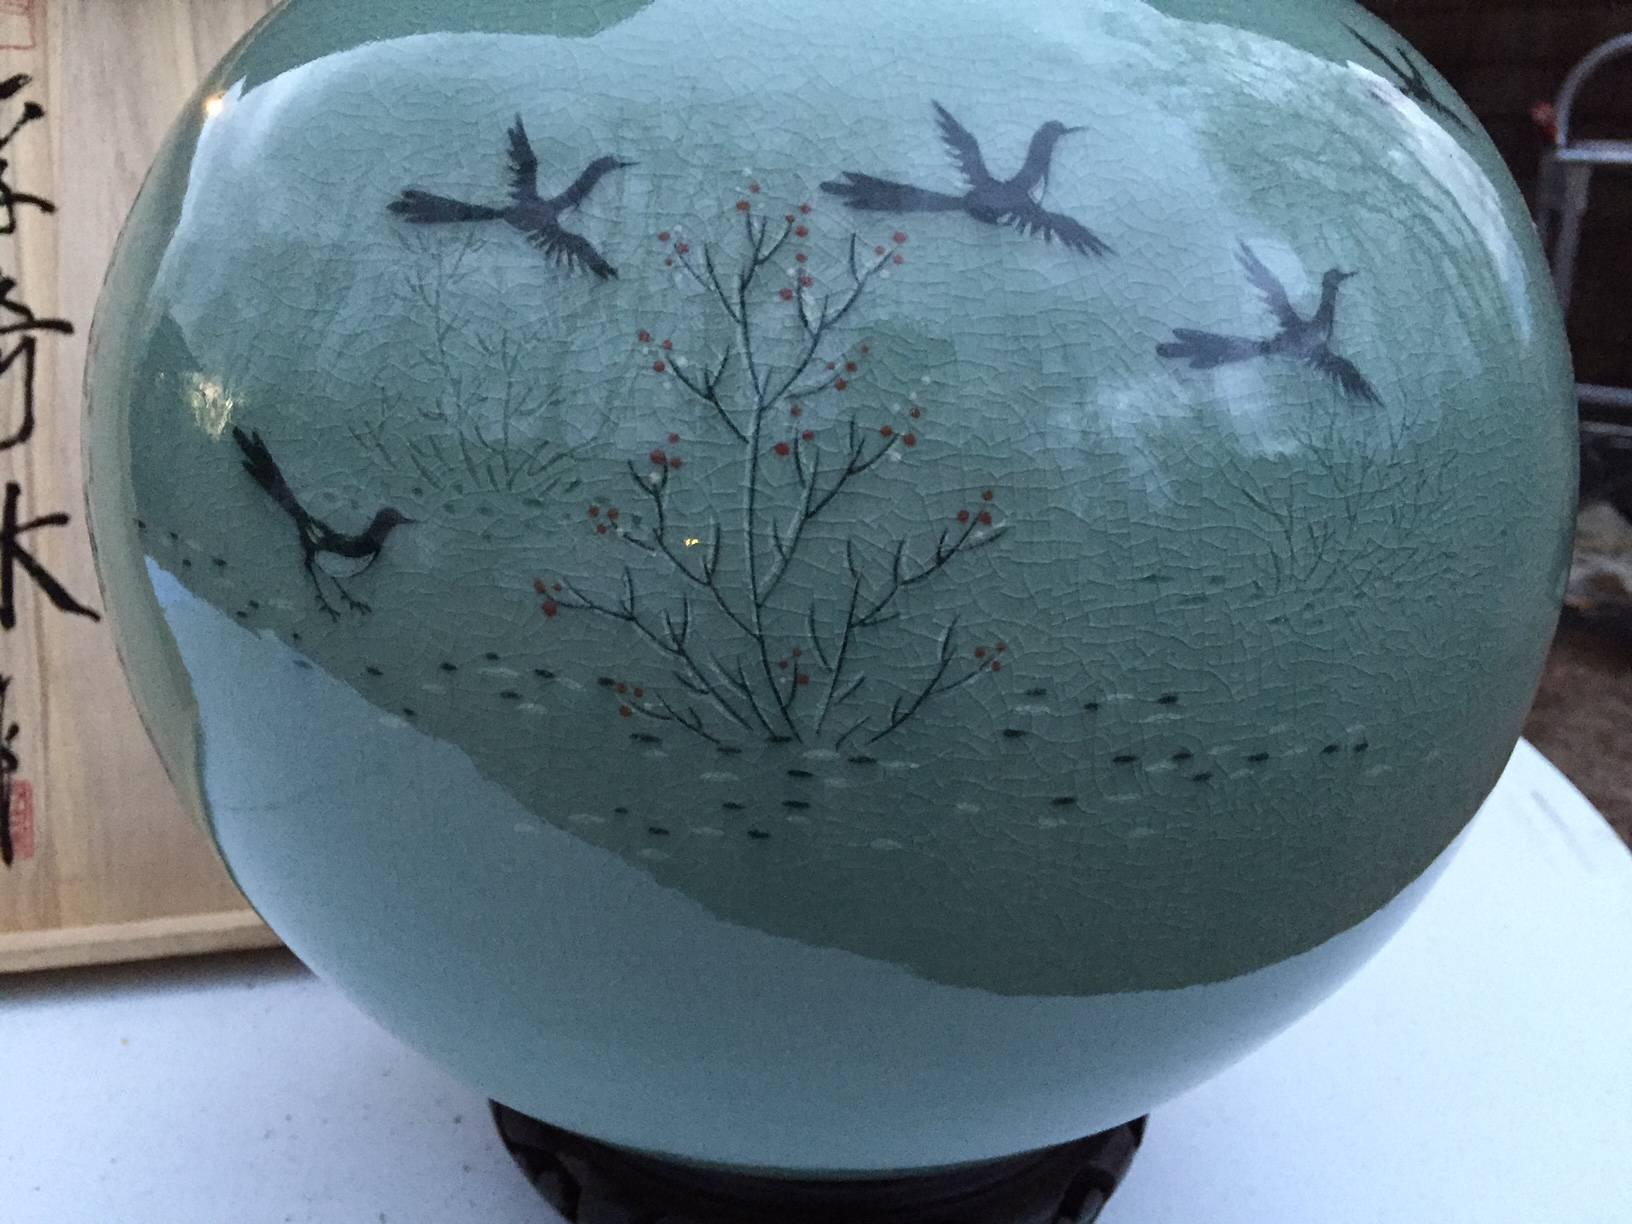 Glazed Fine Birds and Cherry Blossoms Vase, Signed Mint and Boxed